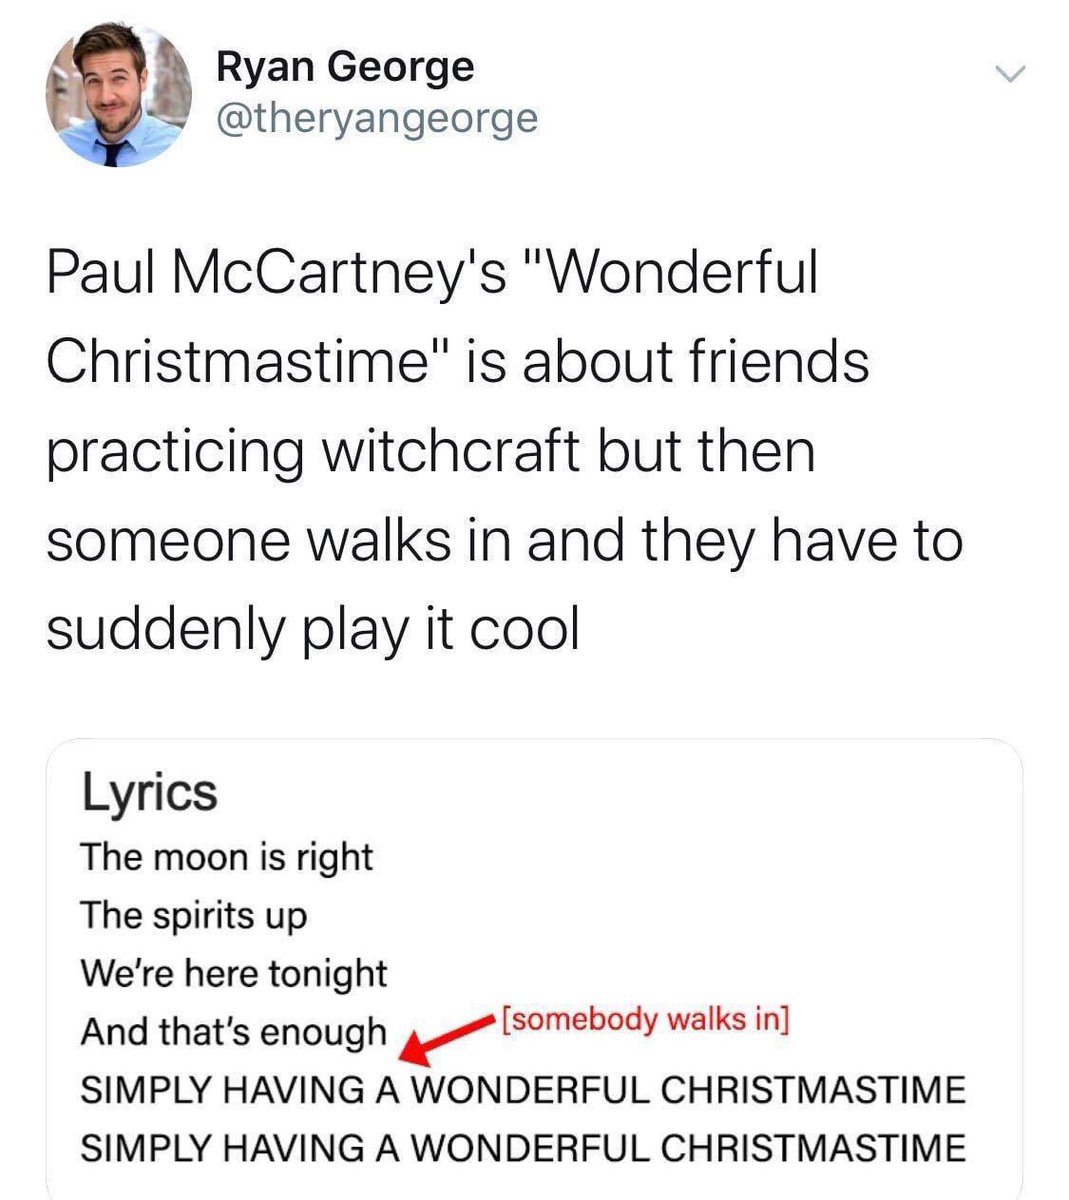 If the rumors of #HocusPocus3 being a #Christmas movie are true, you know the song the Sanderson Sisters have to sing is a cover of “Wonderful Christmastime”, right?

Simply to make this meme come to life: